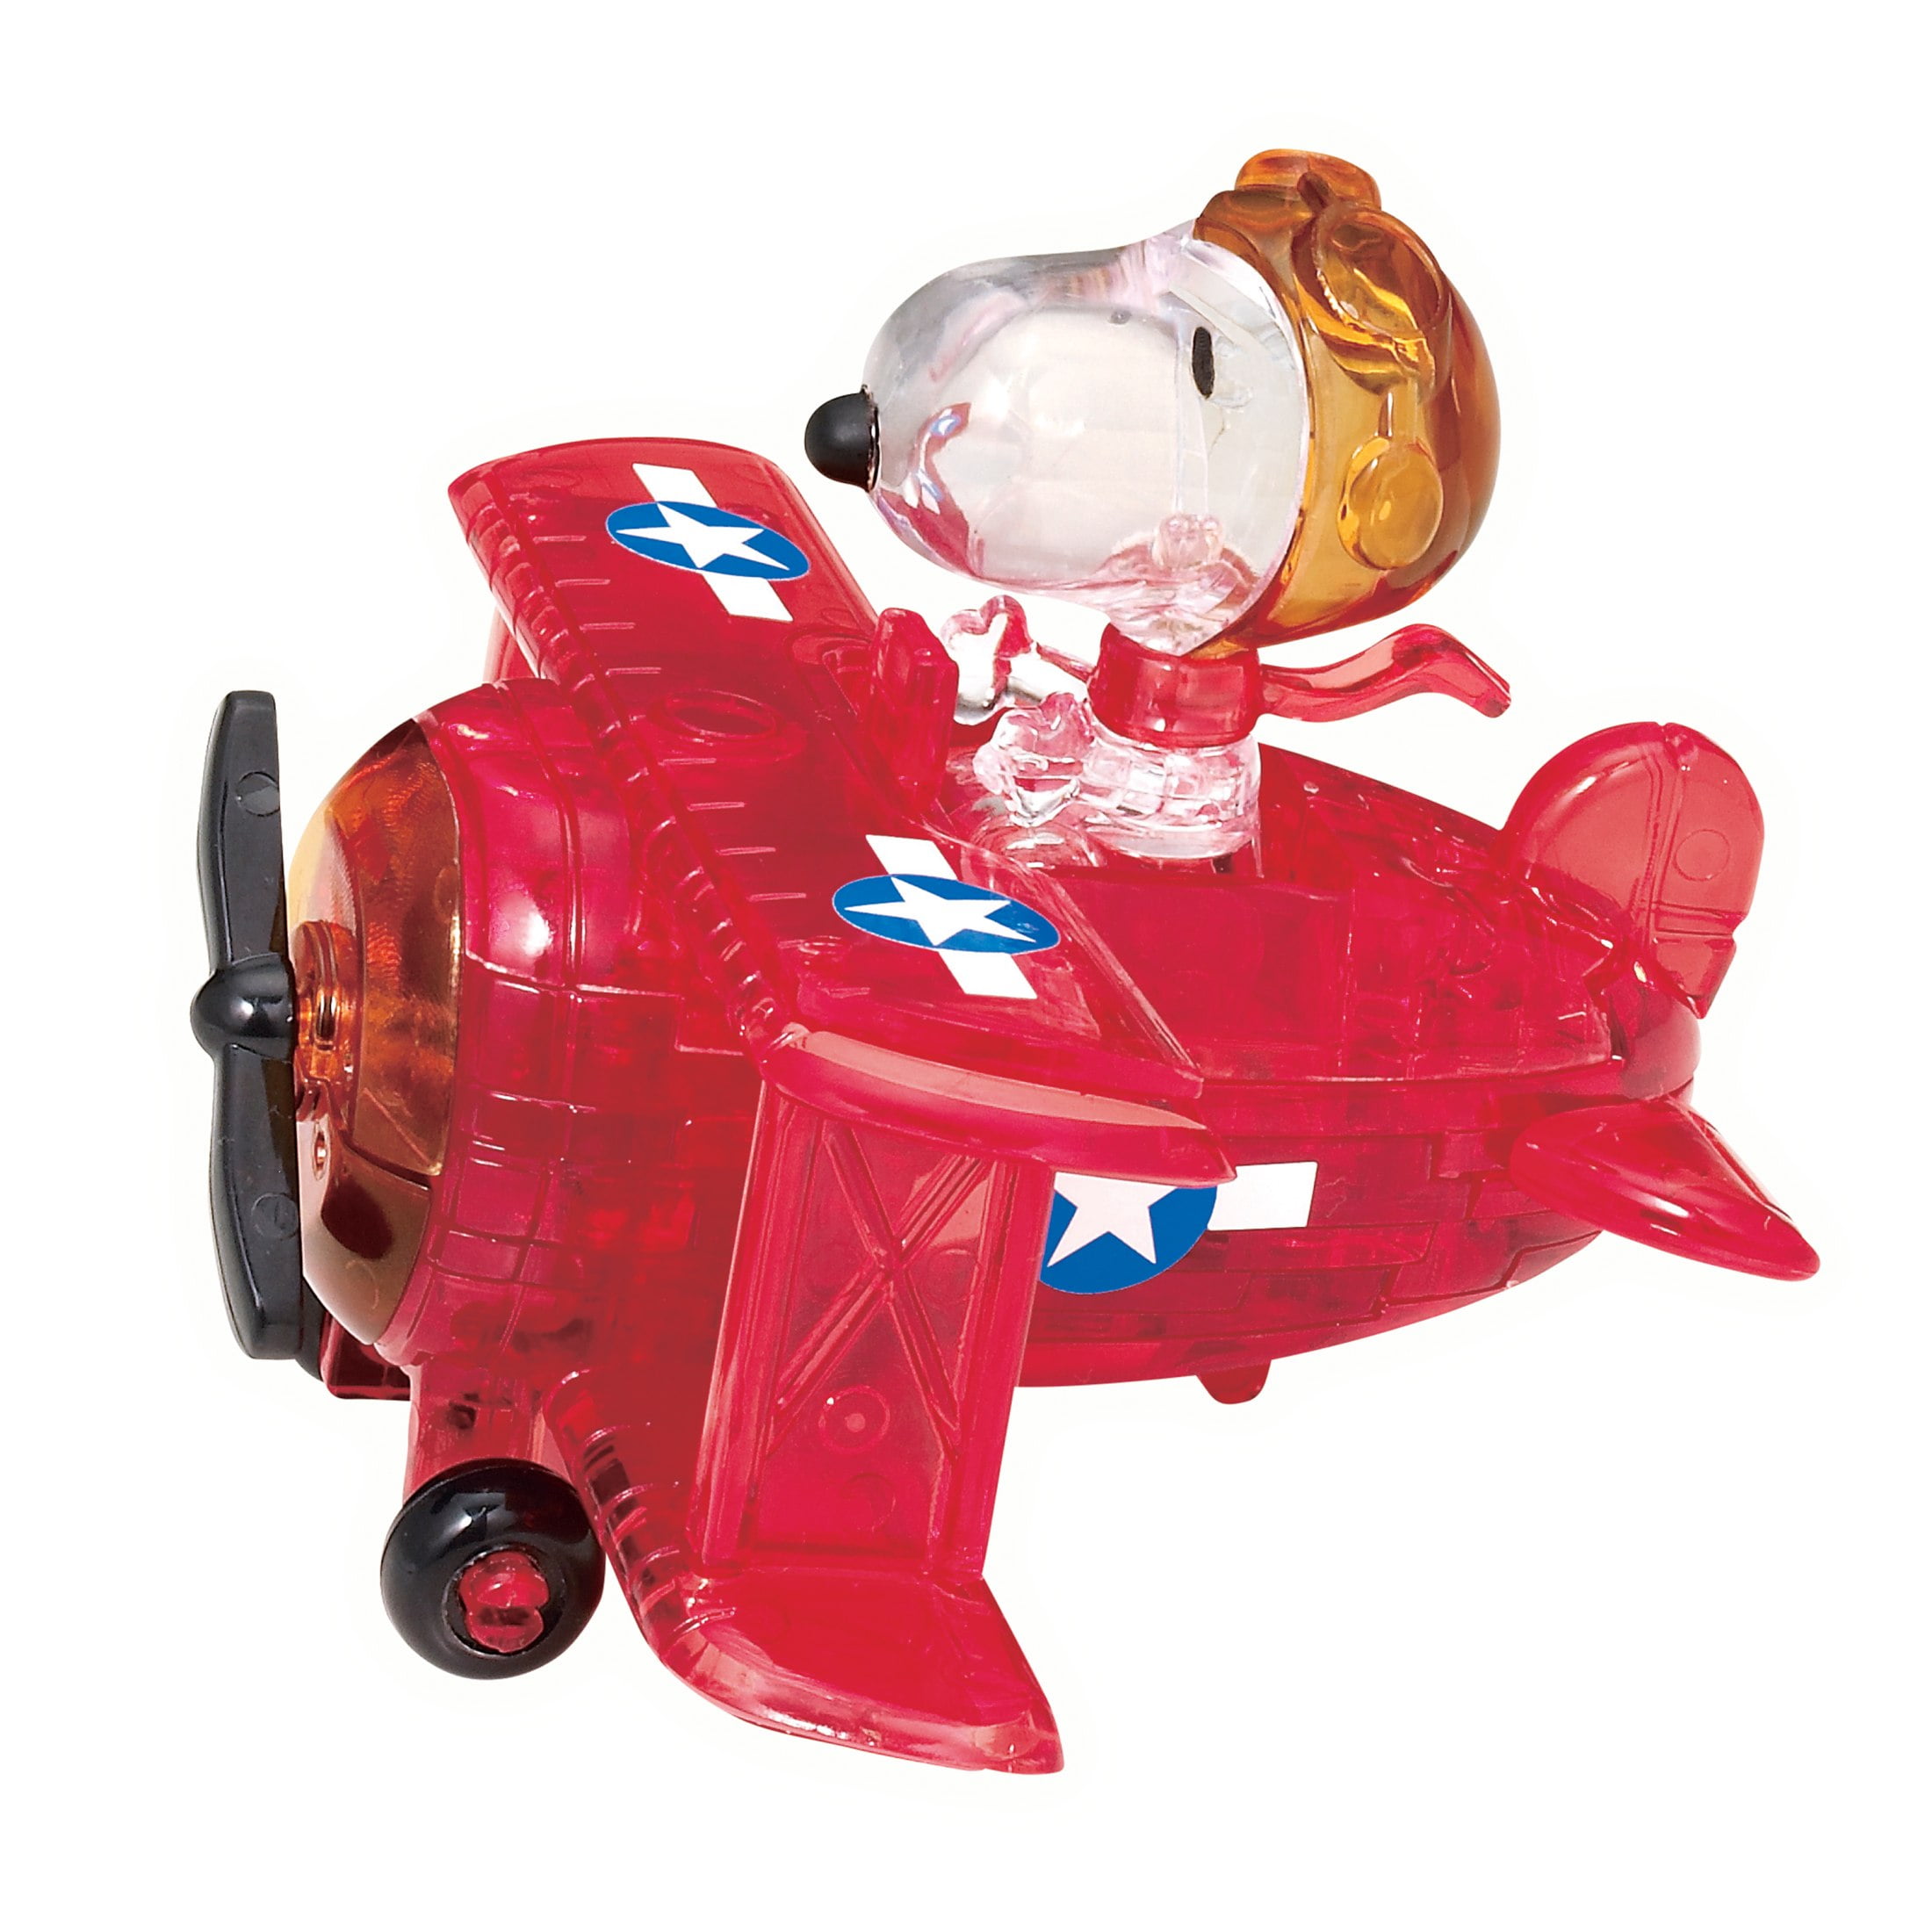 Wind Up Motor 3D Airplane Puzzle Plastic Die-Cut Pieces Arts/Crafts,Toy Model 